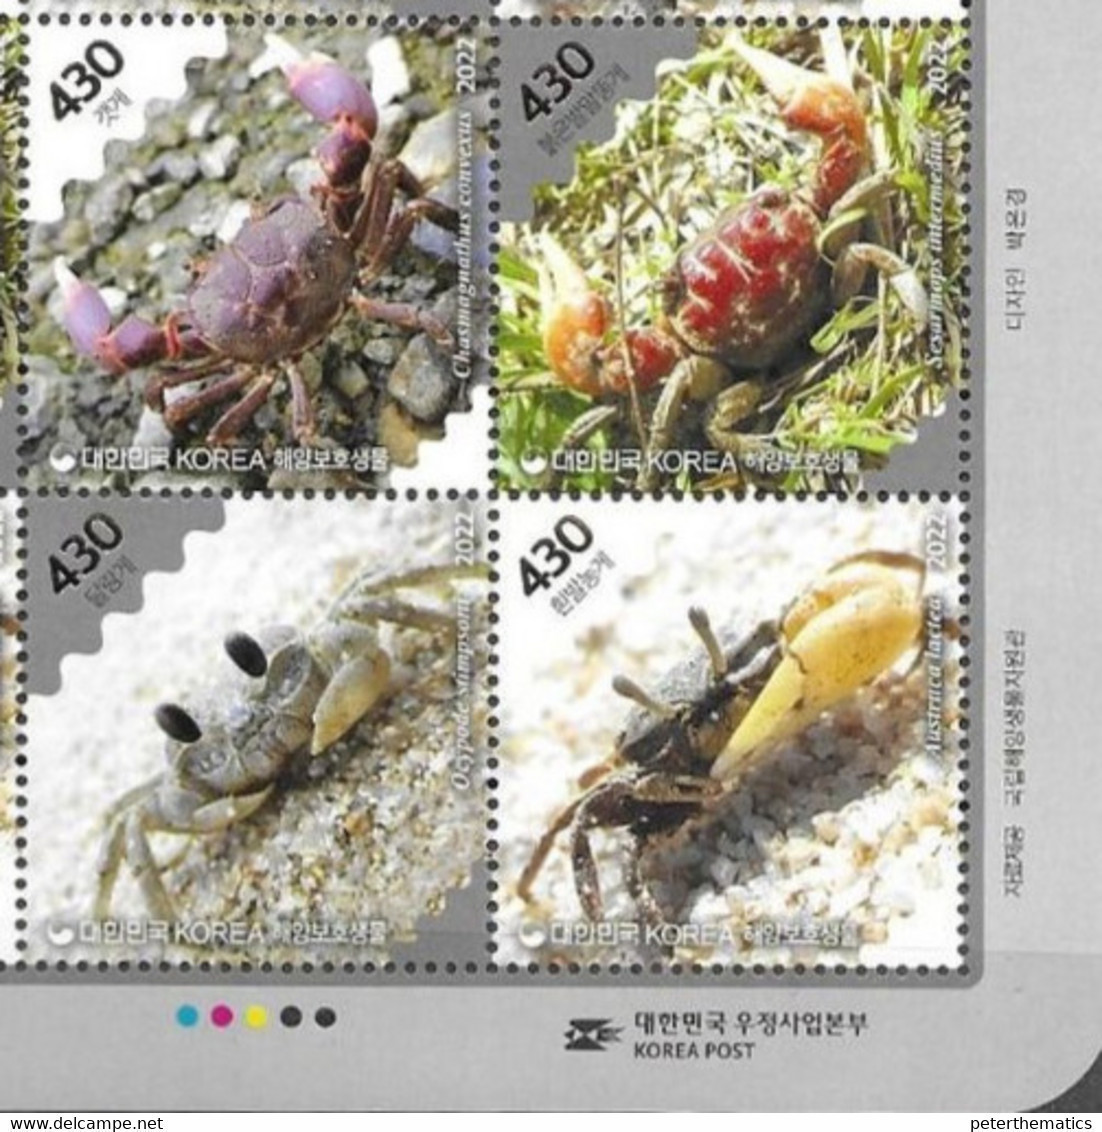 SOUTH KOREA, 2022, MNH,PROTECTED MARINE SPECIES, CRUSTACEANS, CRABS,4v - Crostacei